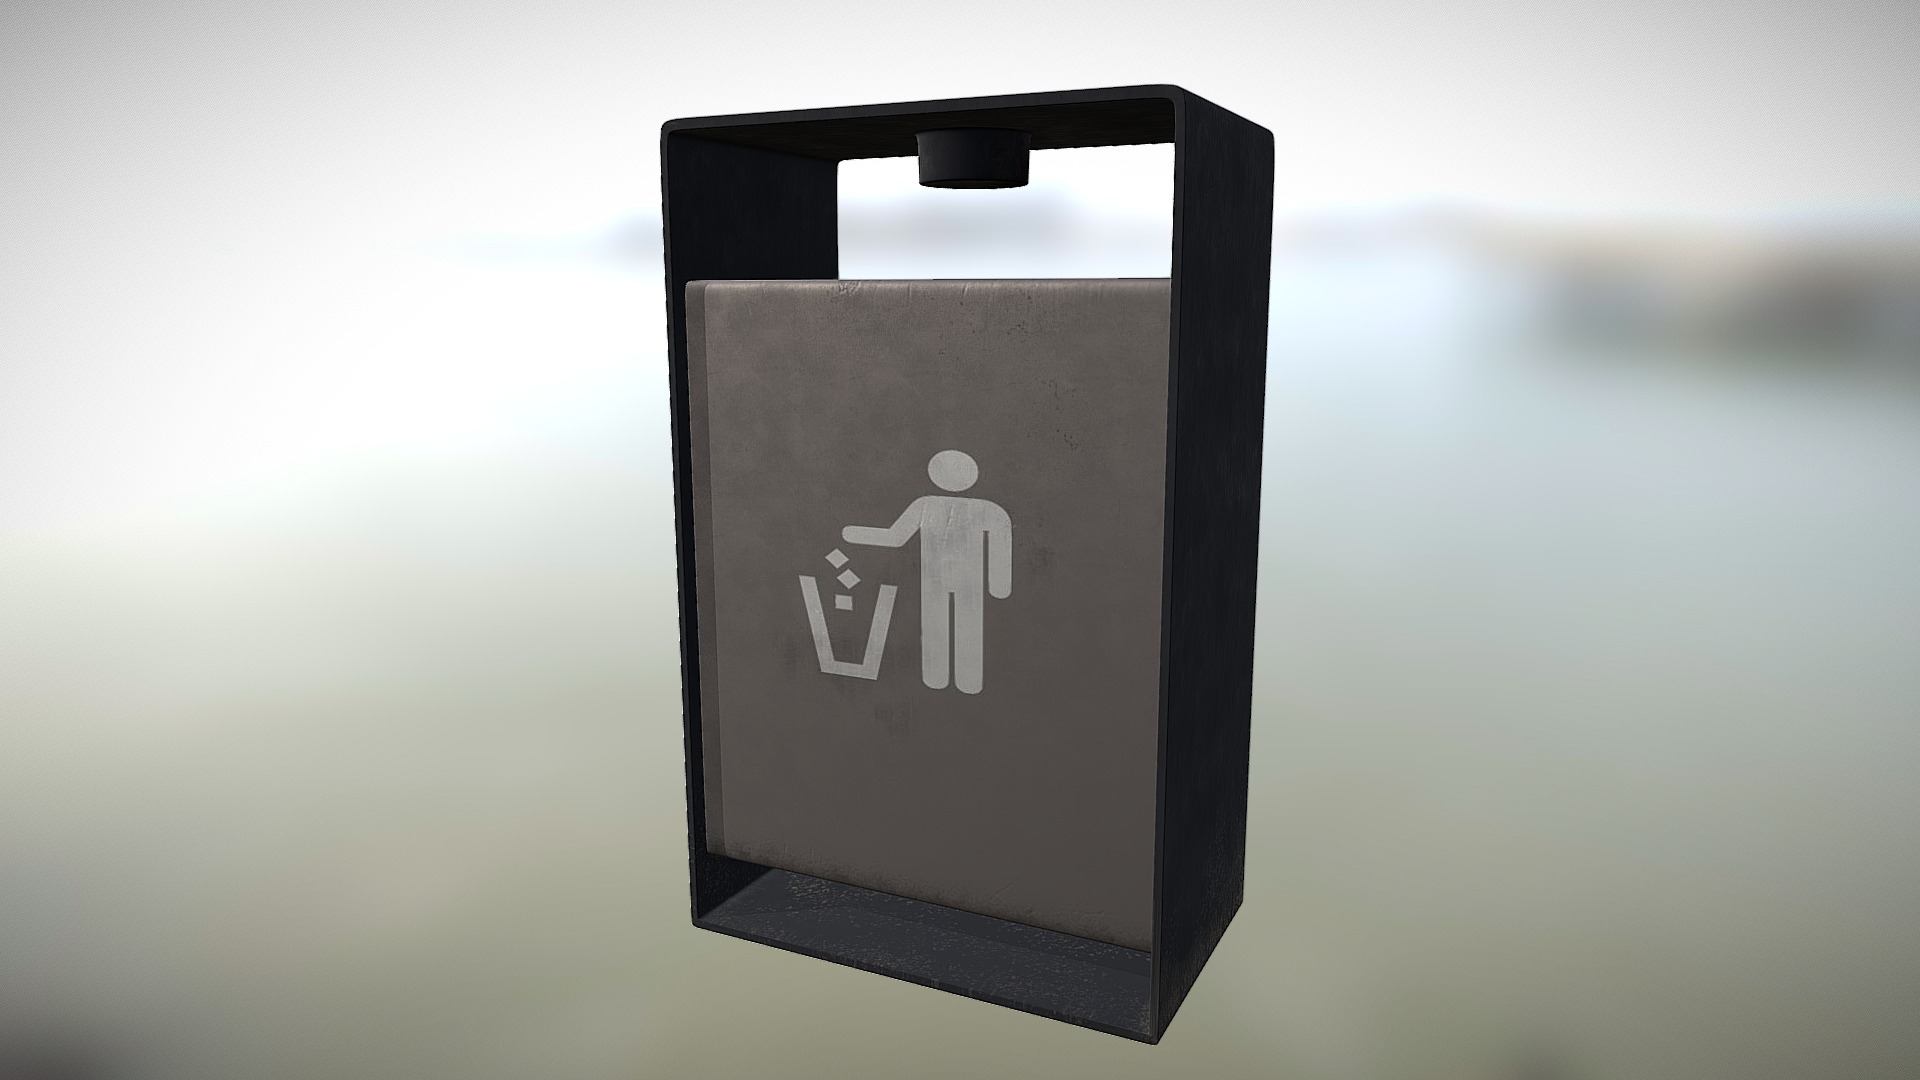 3D model Dustbin - This is a 3D model of the Dustbin. The 3D model is about a black rectangular object with a white logo on it.